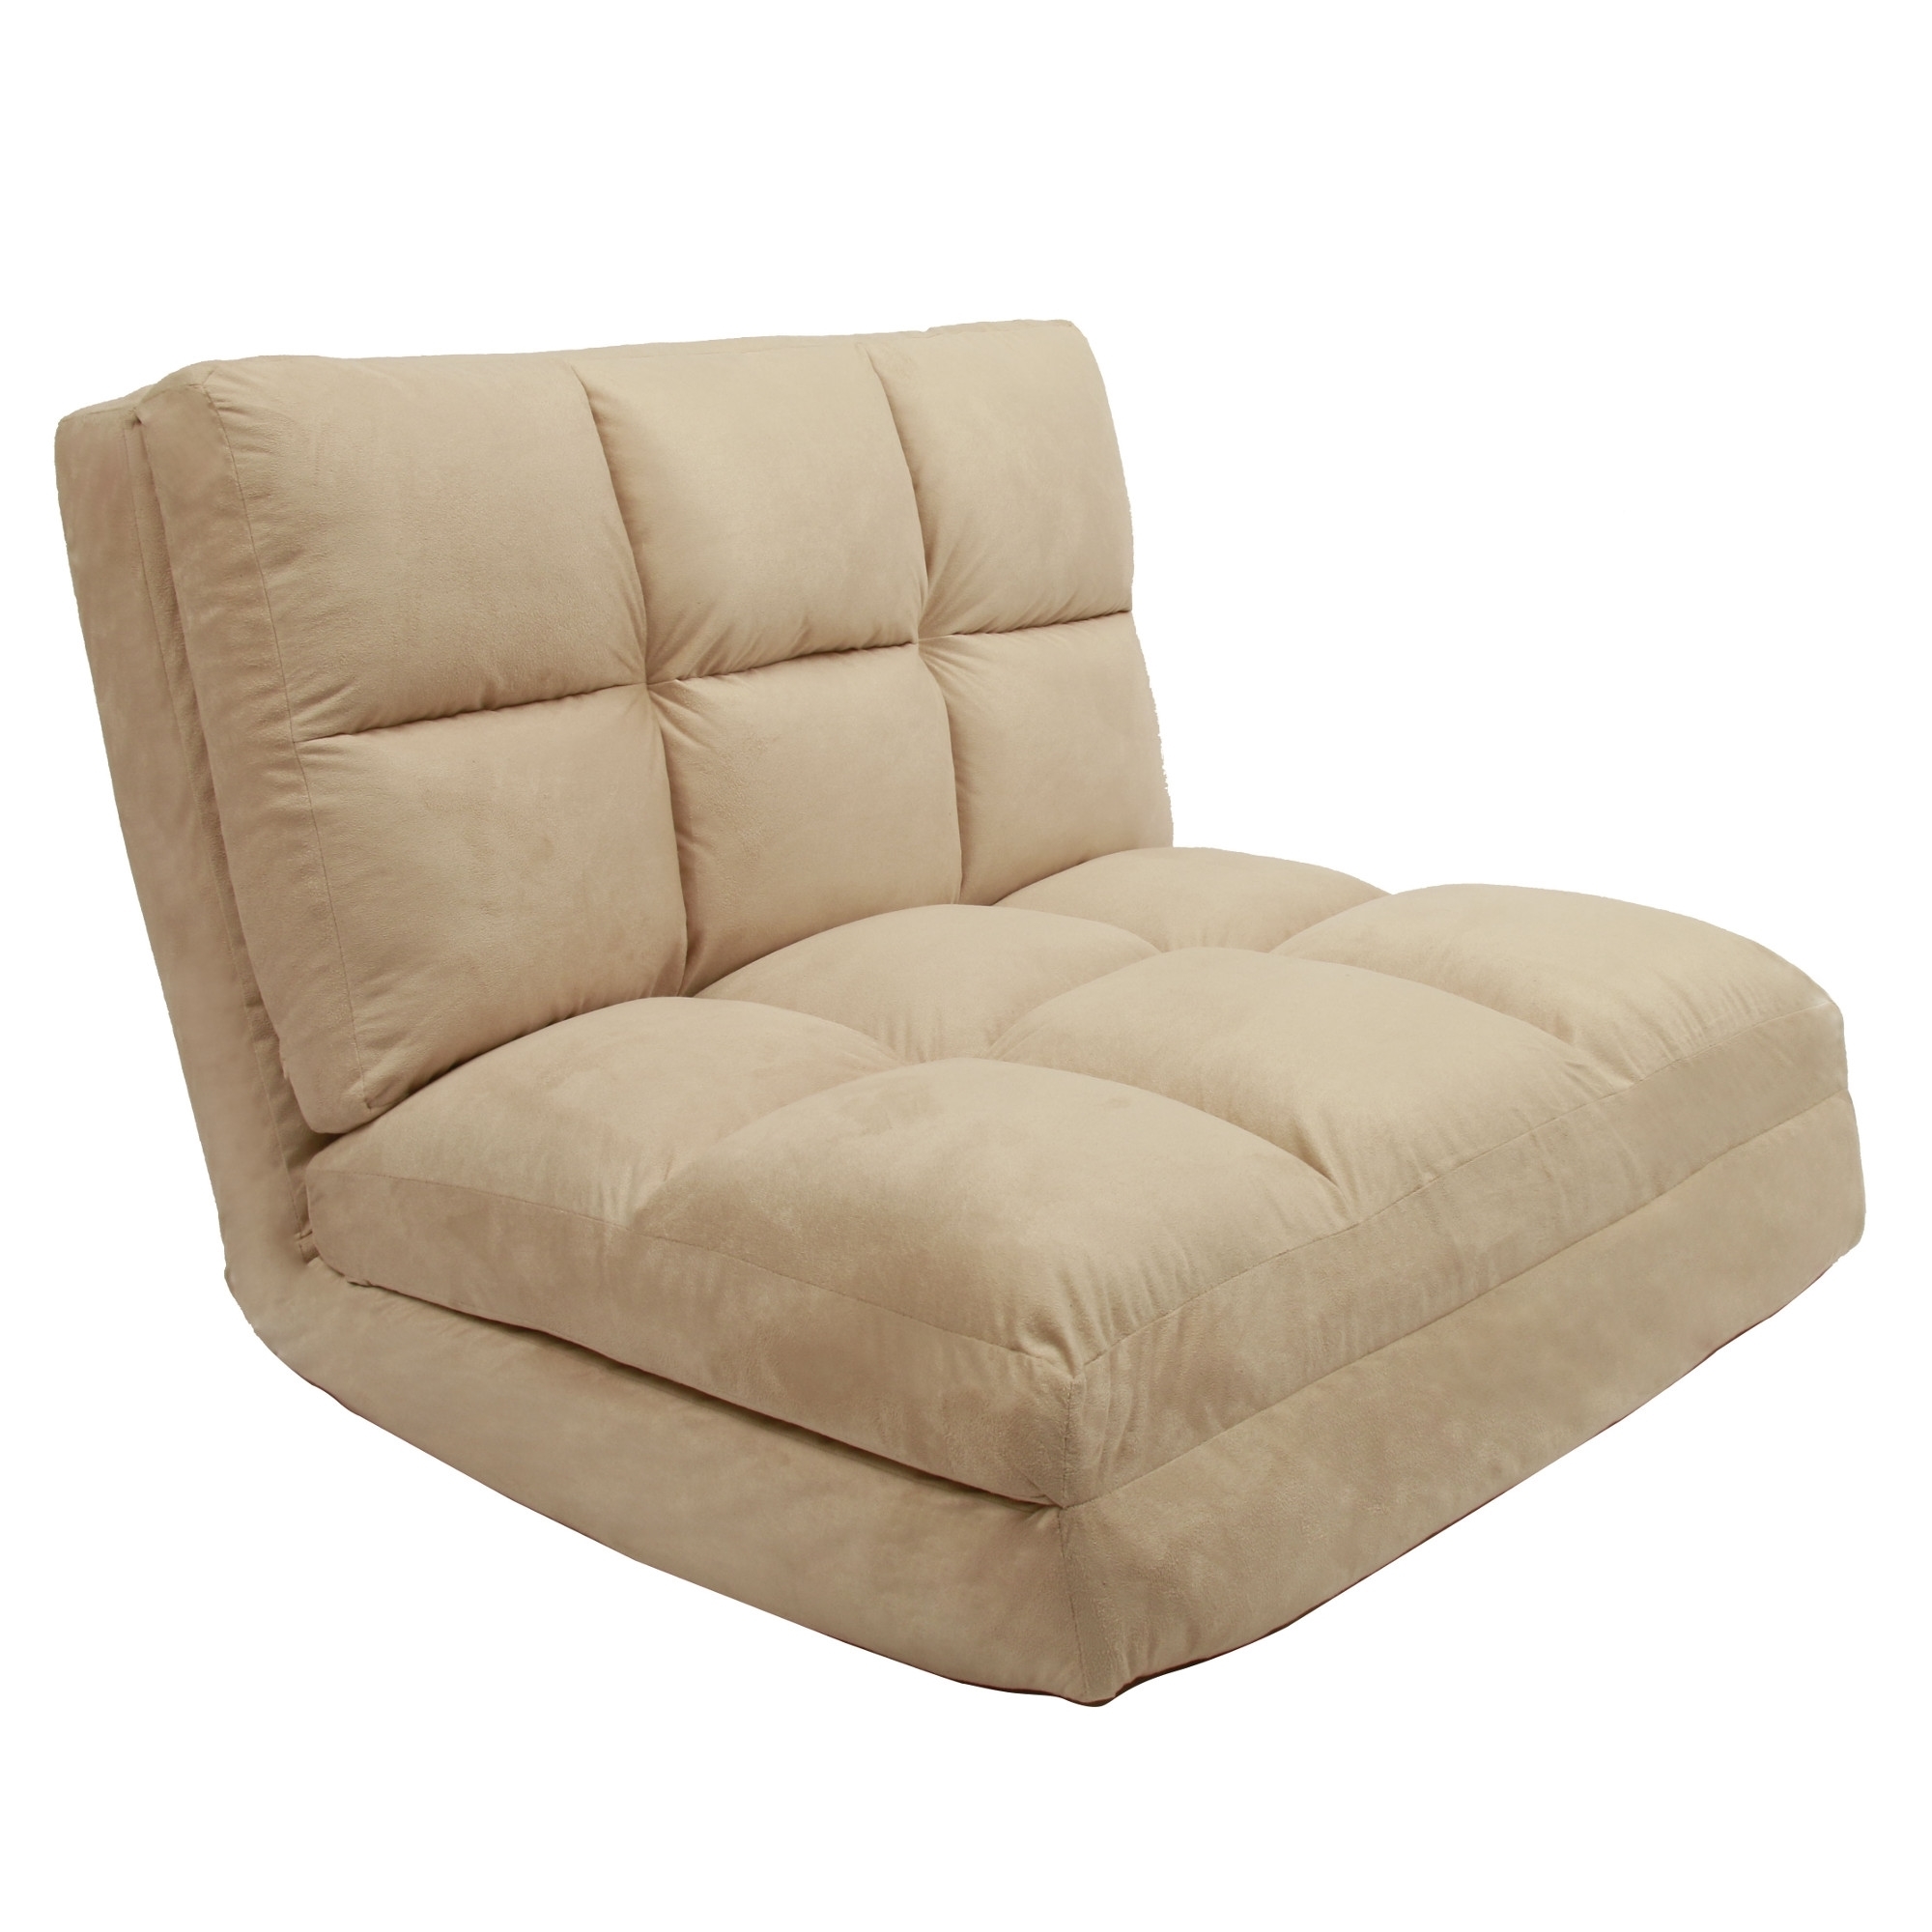 Loungie Microsuede Flip Chair Lounger Seat Beige - image 4 of 9